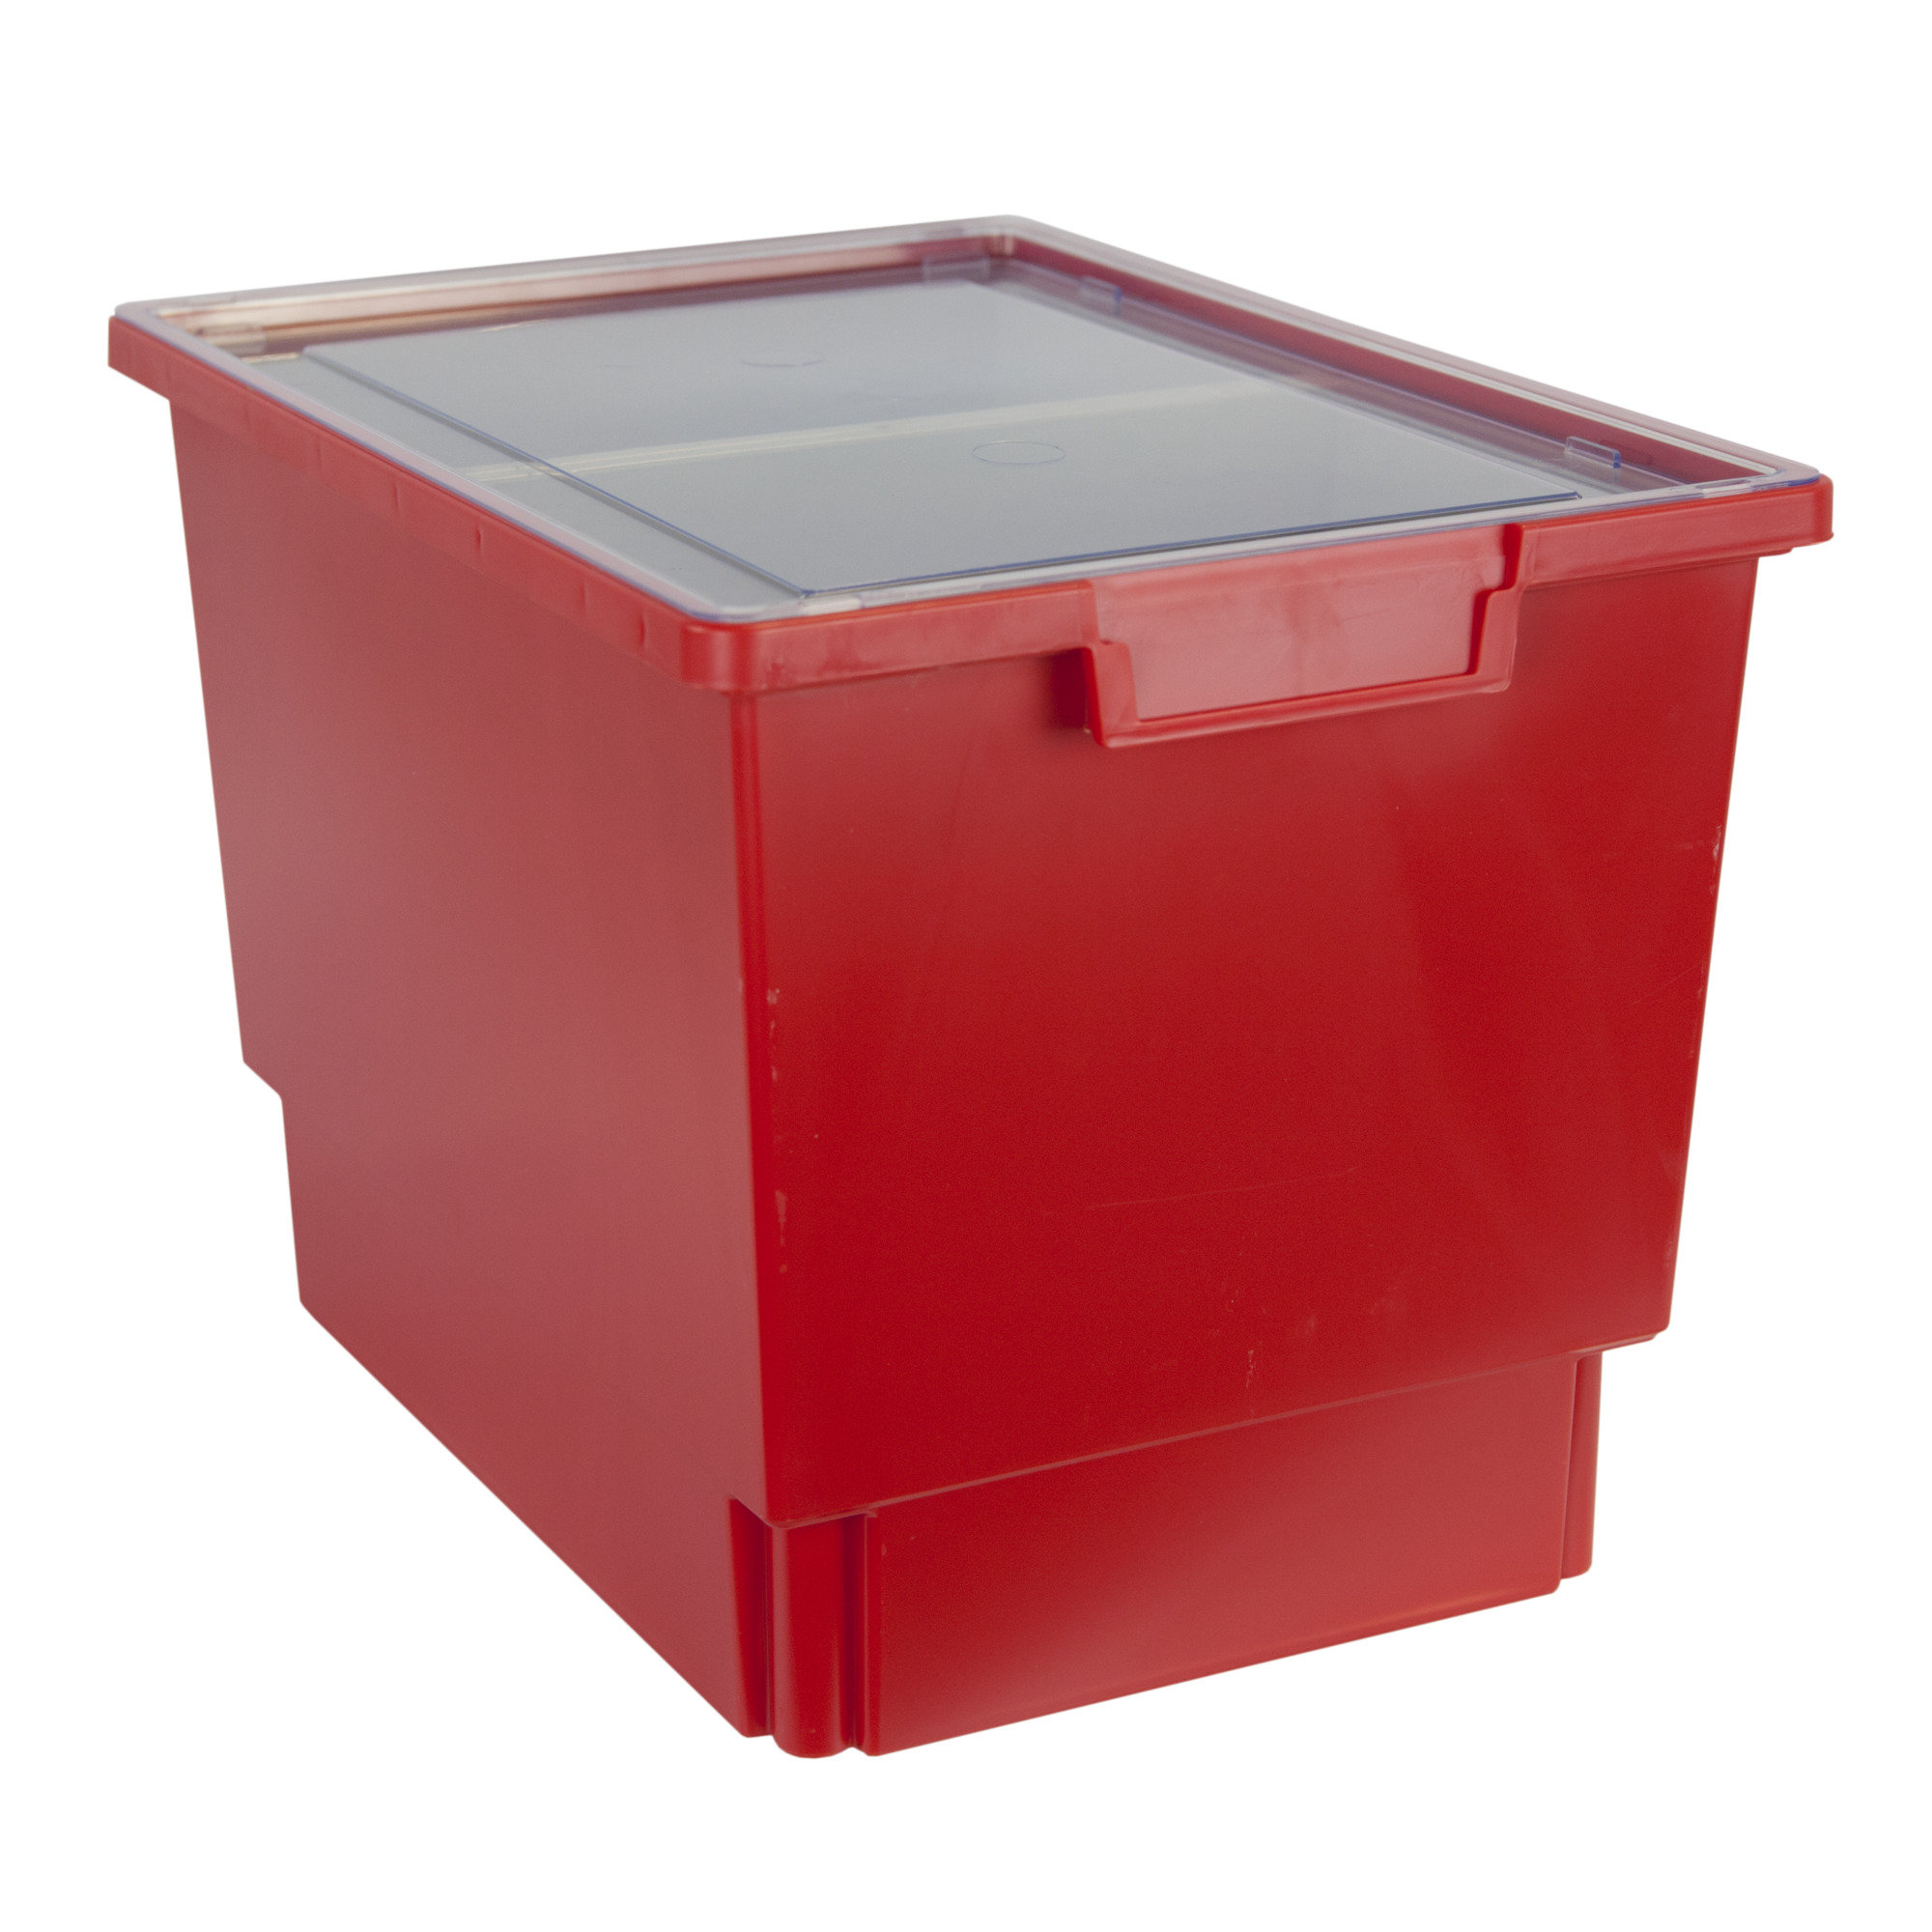 Certwood StorWerks, Slim Line 12Inch Tray Kit (2 x Divisions) Red-3PK, Included (qty.) 3, Material Plastic, Height 12 in, Model CE1954PR-NK0404-3